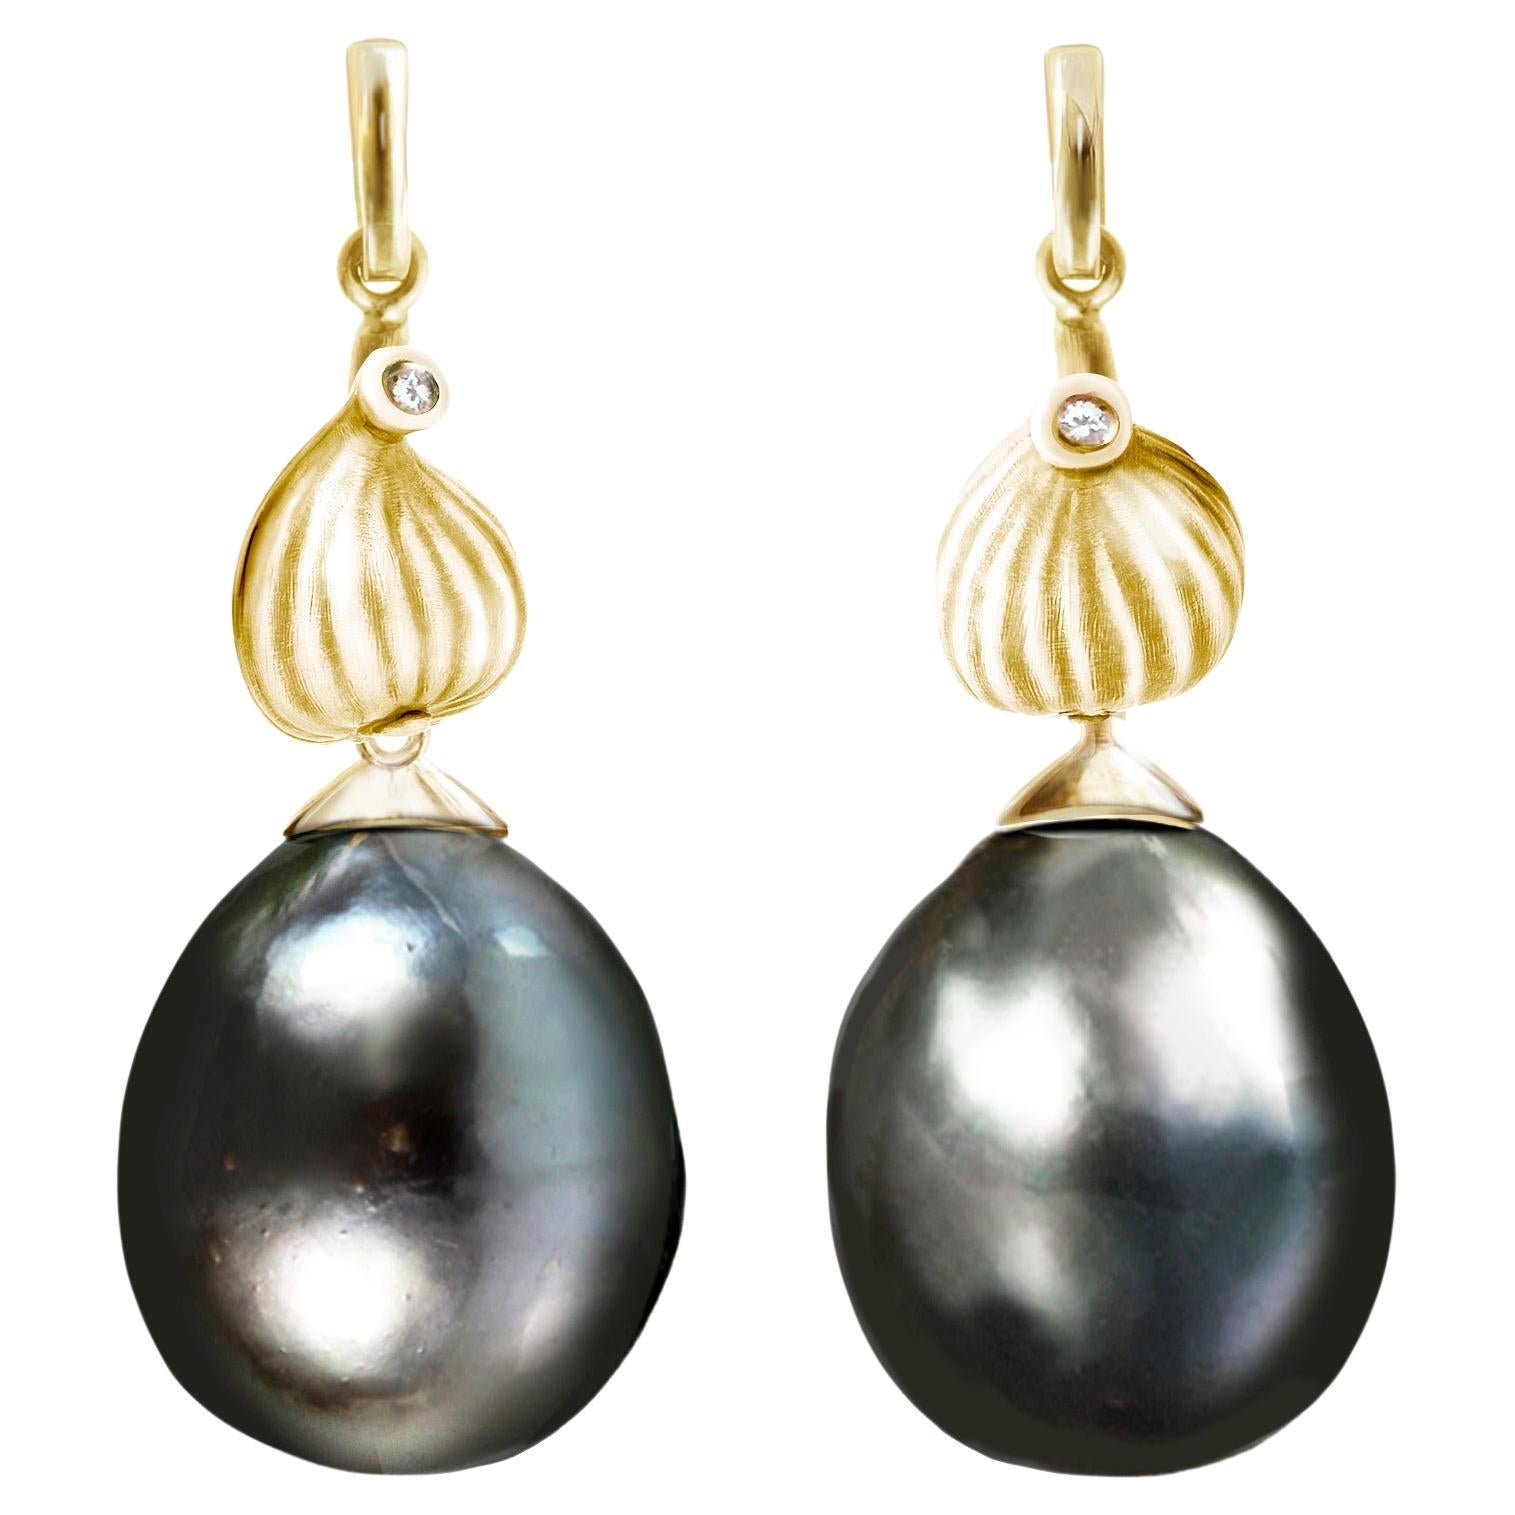 Yellow Gold Fig Cocktail Earrings with Black Pearls and Diamonds by the Artist